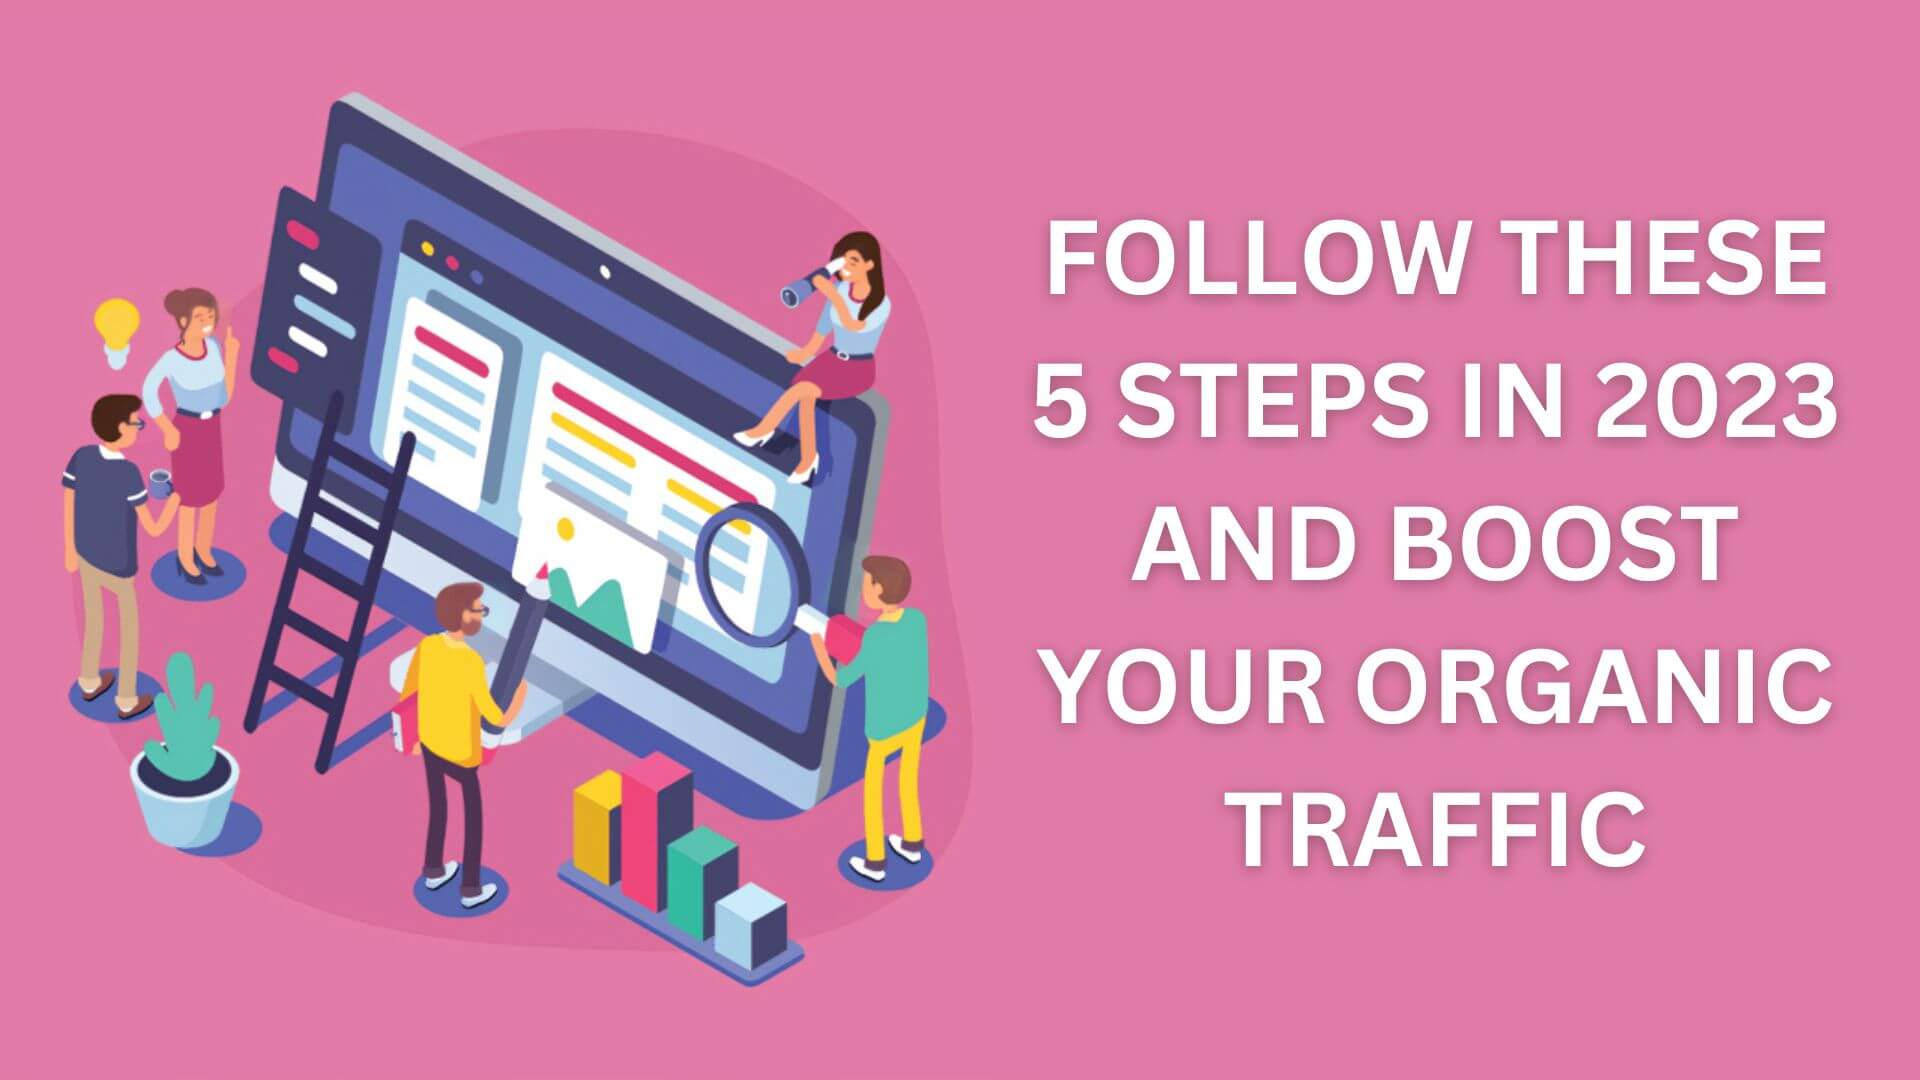 FOLLOW THESE 5 STEPS IN 2023 AND BOOST ORGANIC TRAFFIC